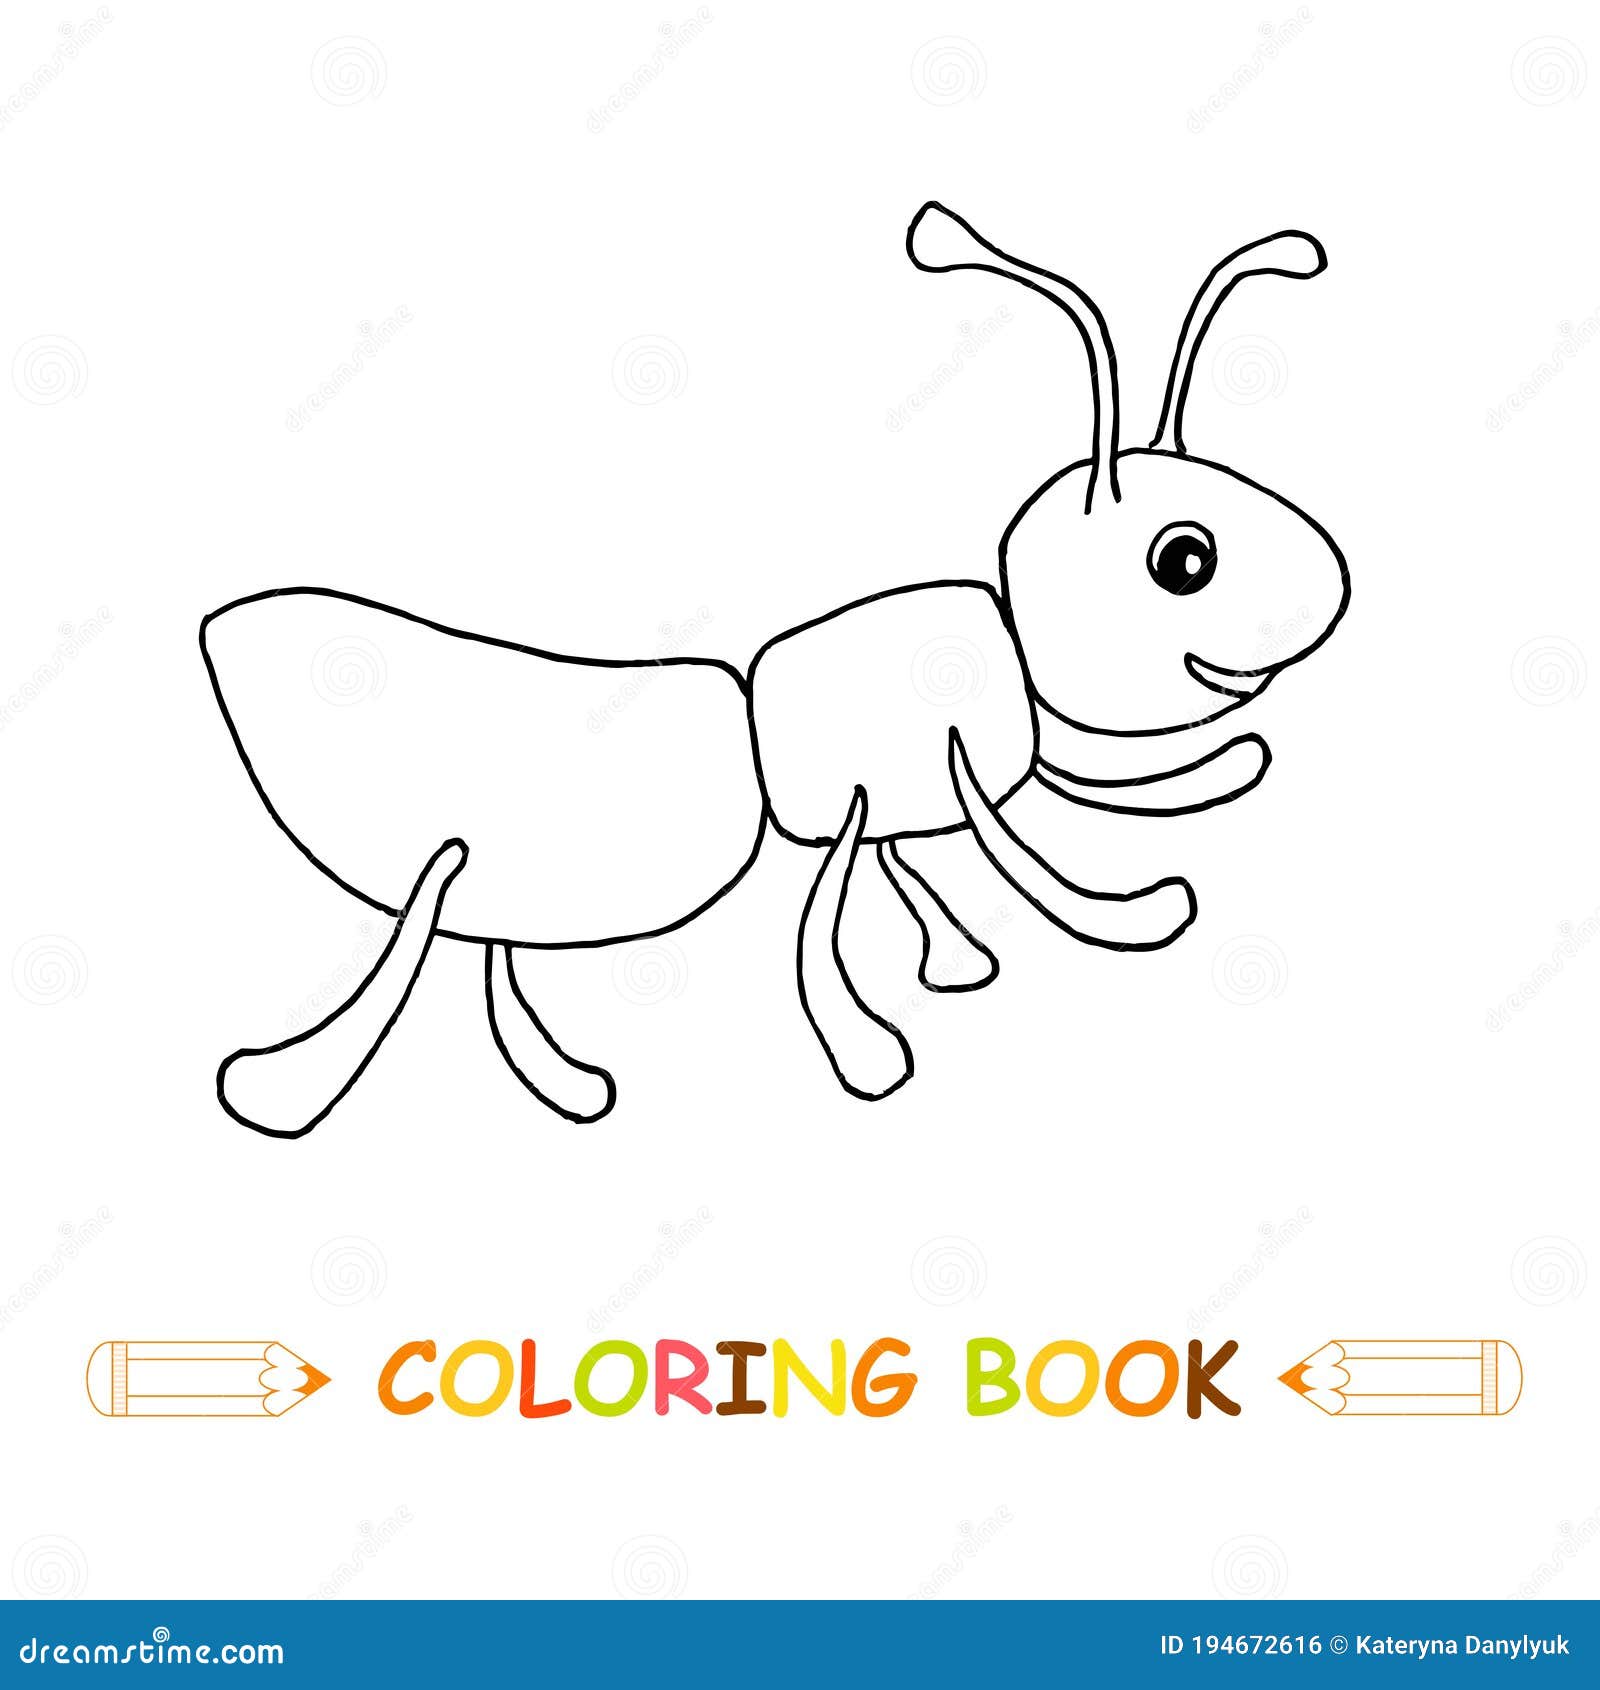 Ant Coloring Page Vector Illustration, Cute Insect in Monochrome ...